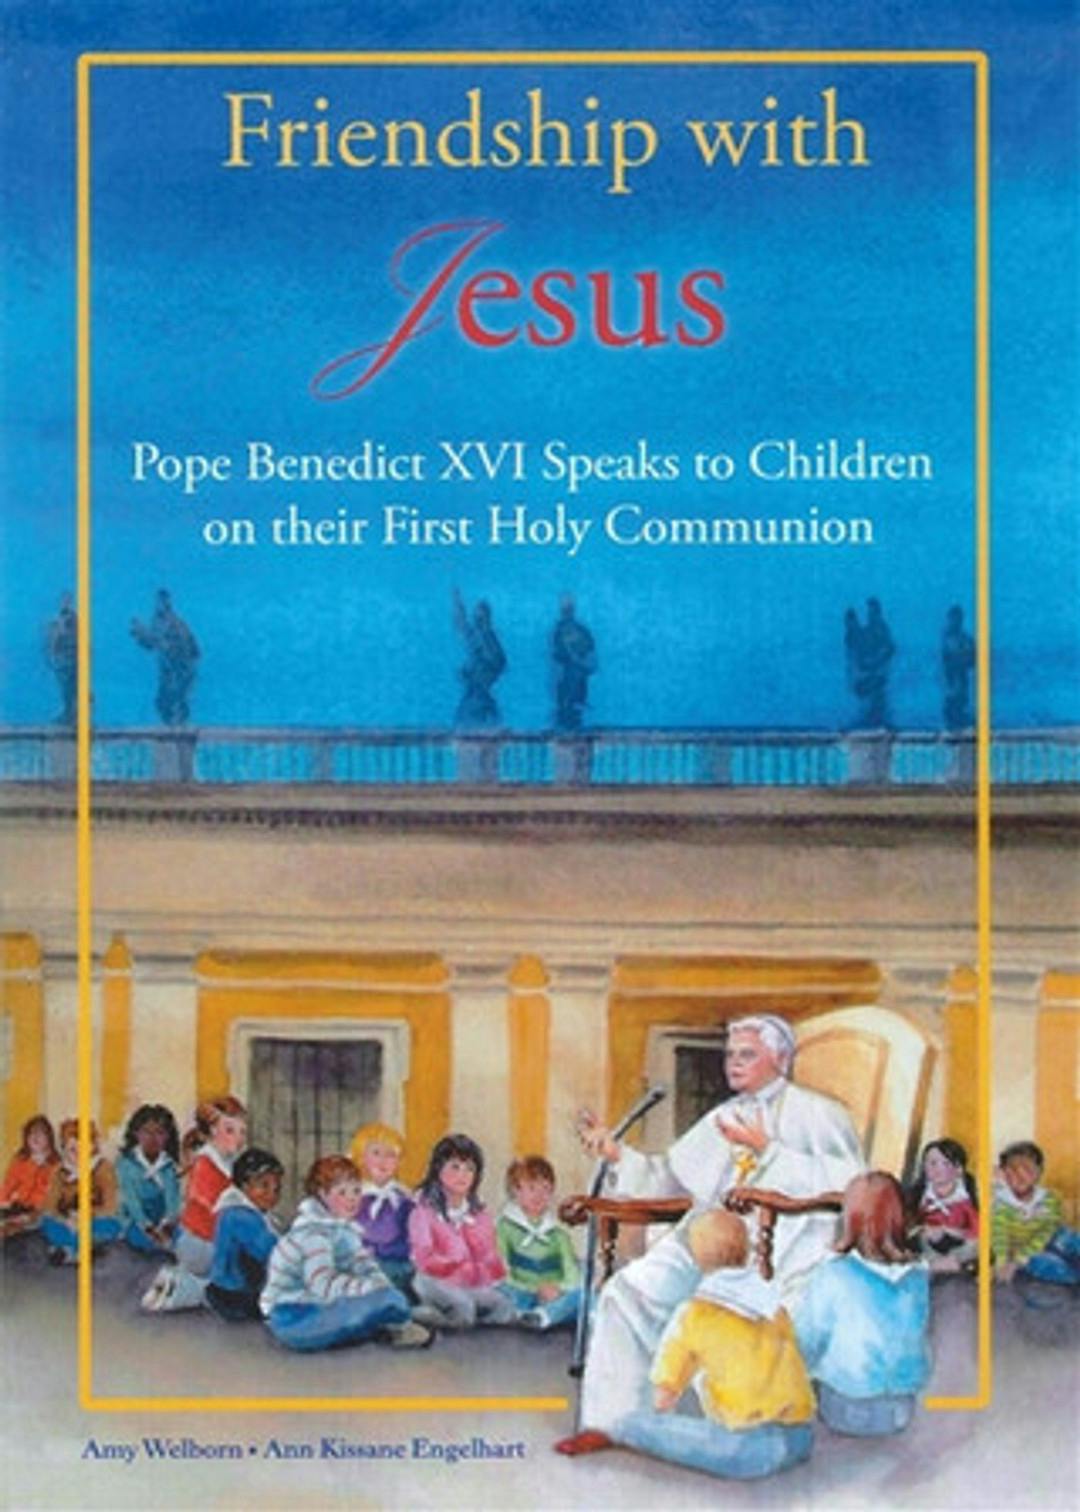 Friendship with Jesus: Pope Benedict XVI Speaks to Children on their First Holy Communion